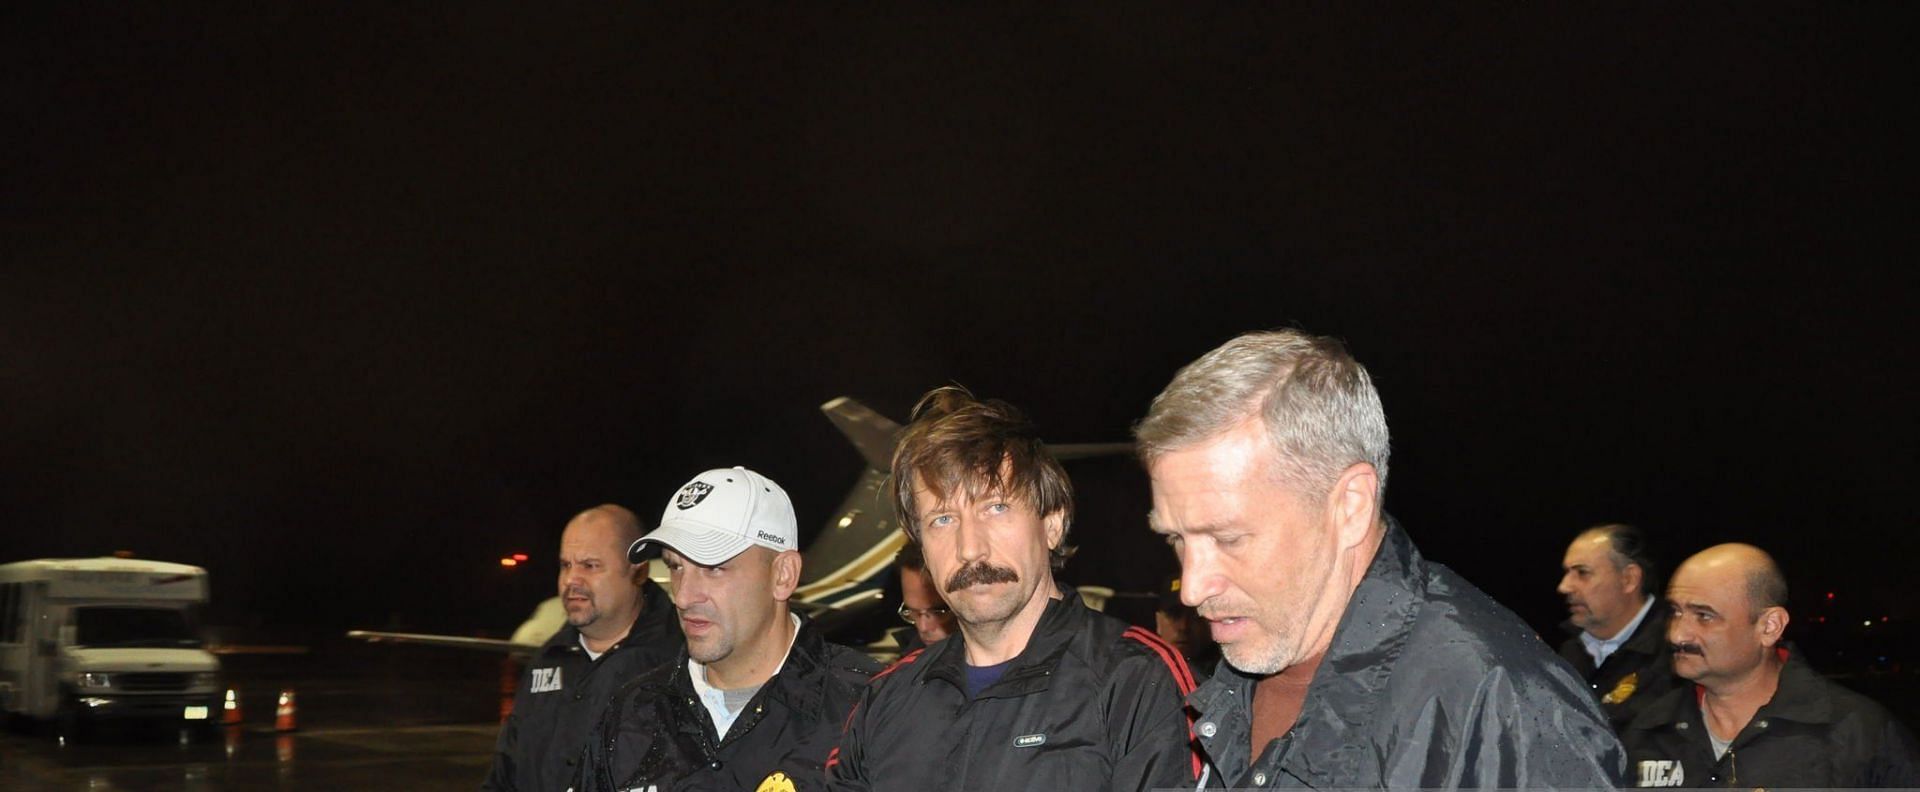 Viktor Bout was arrested in Thailand in 2008 after a sting operation by US officials (Image via U.S. Department of Justice/Getty Images)